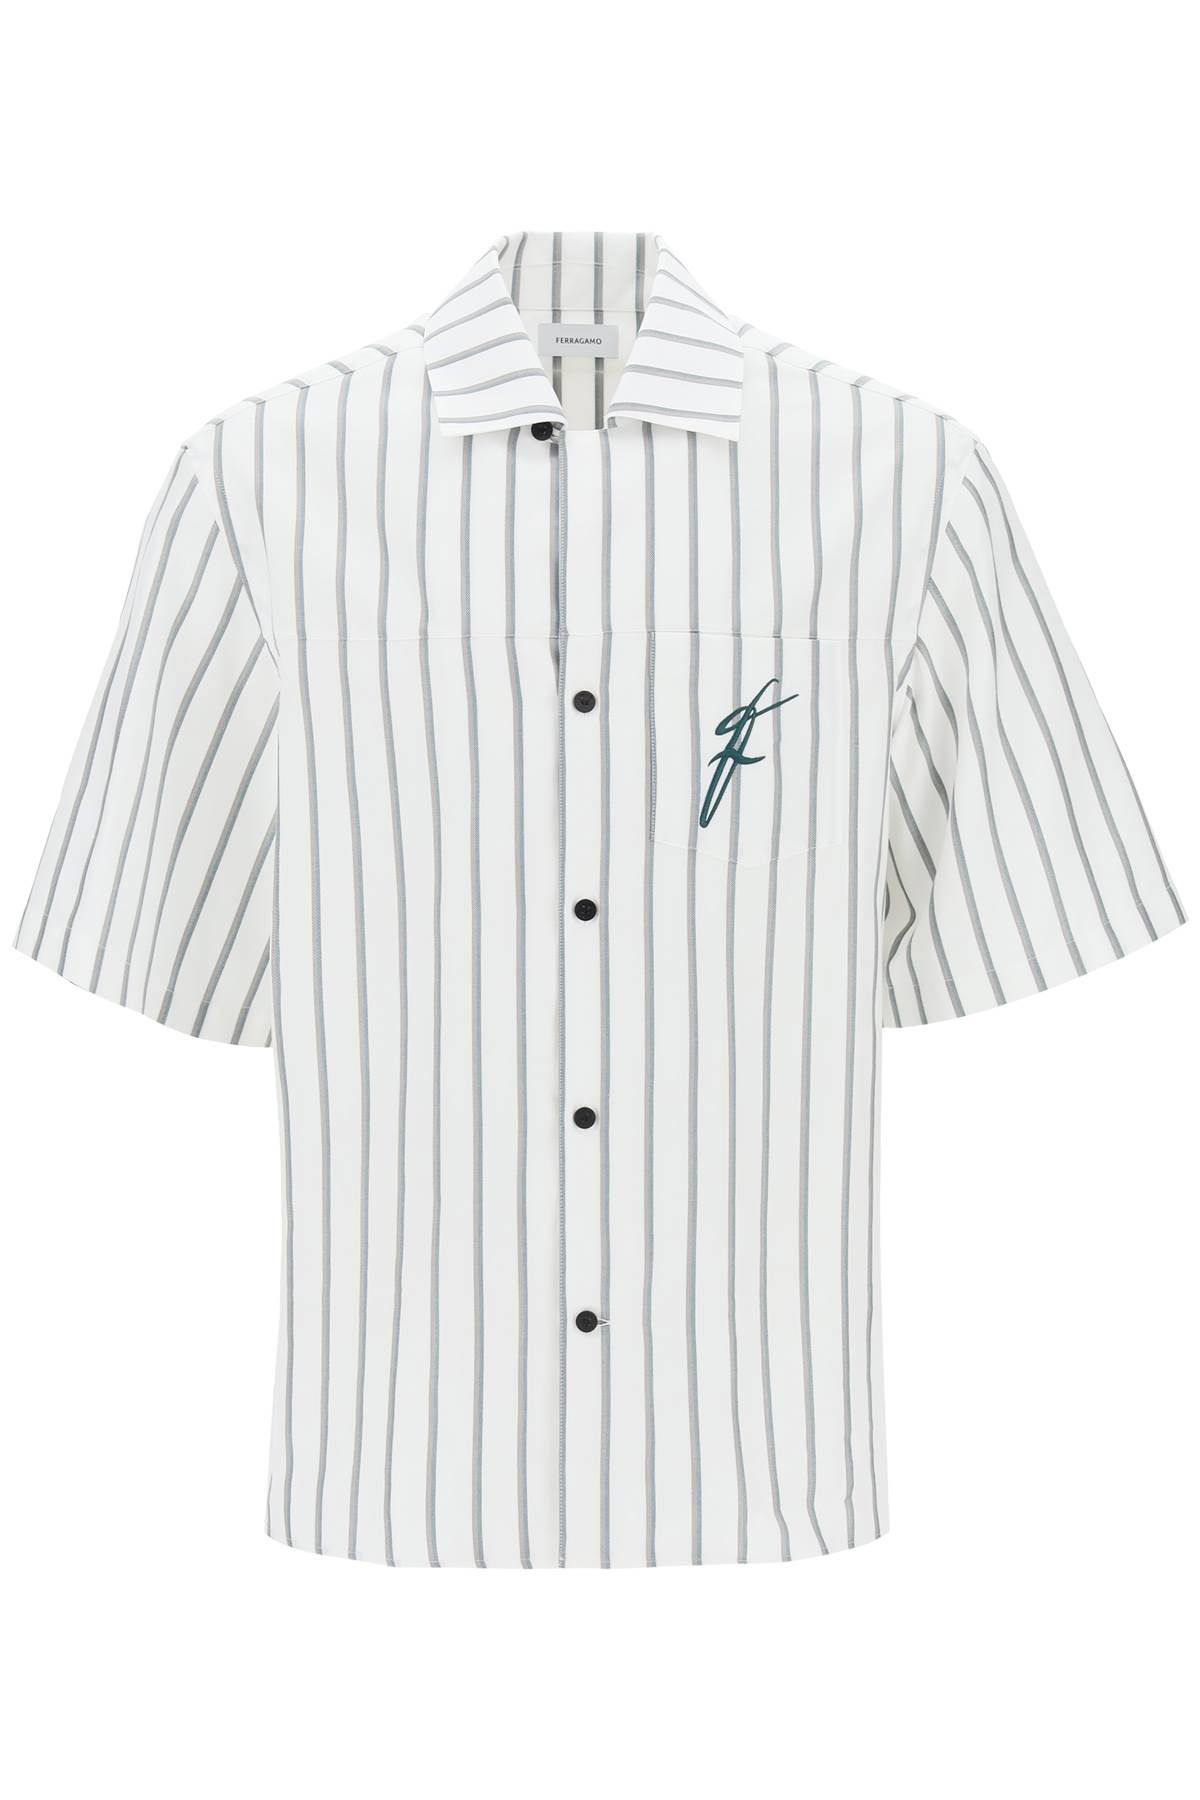 Shop Ferragamo Striped Bowling Shirt With Button In White